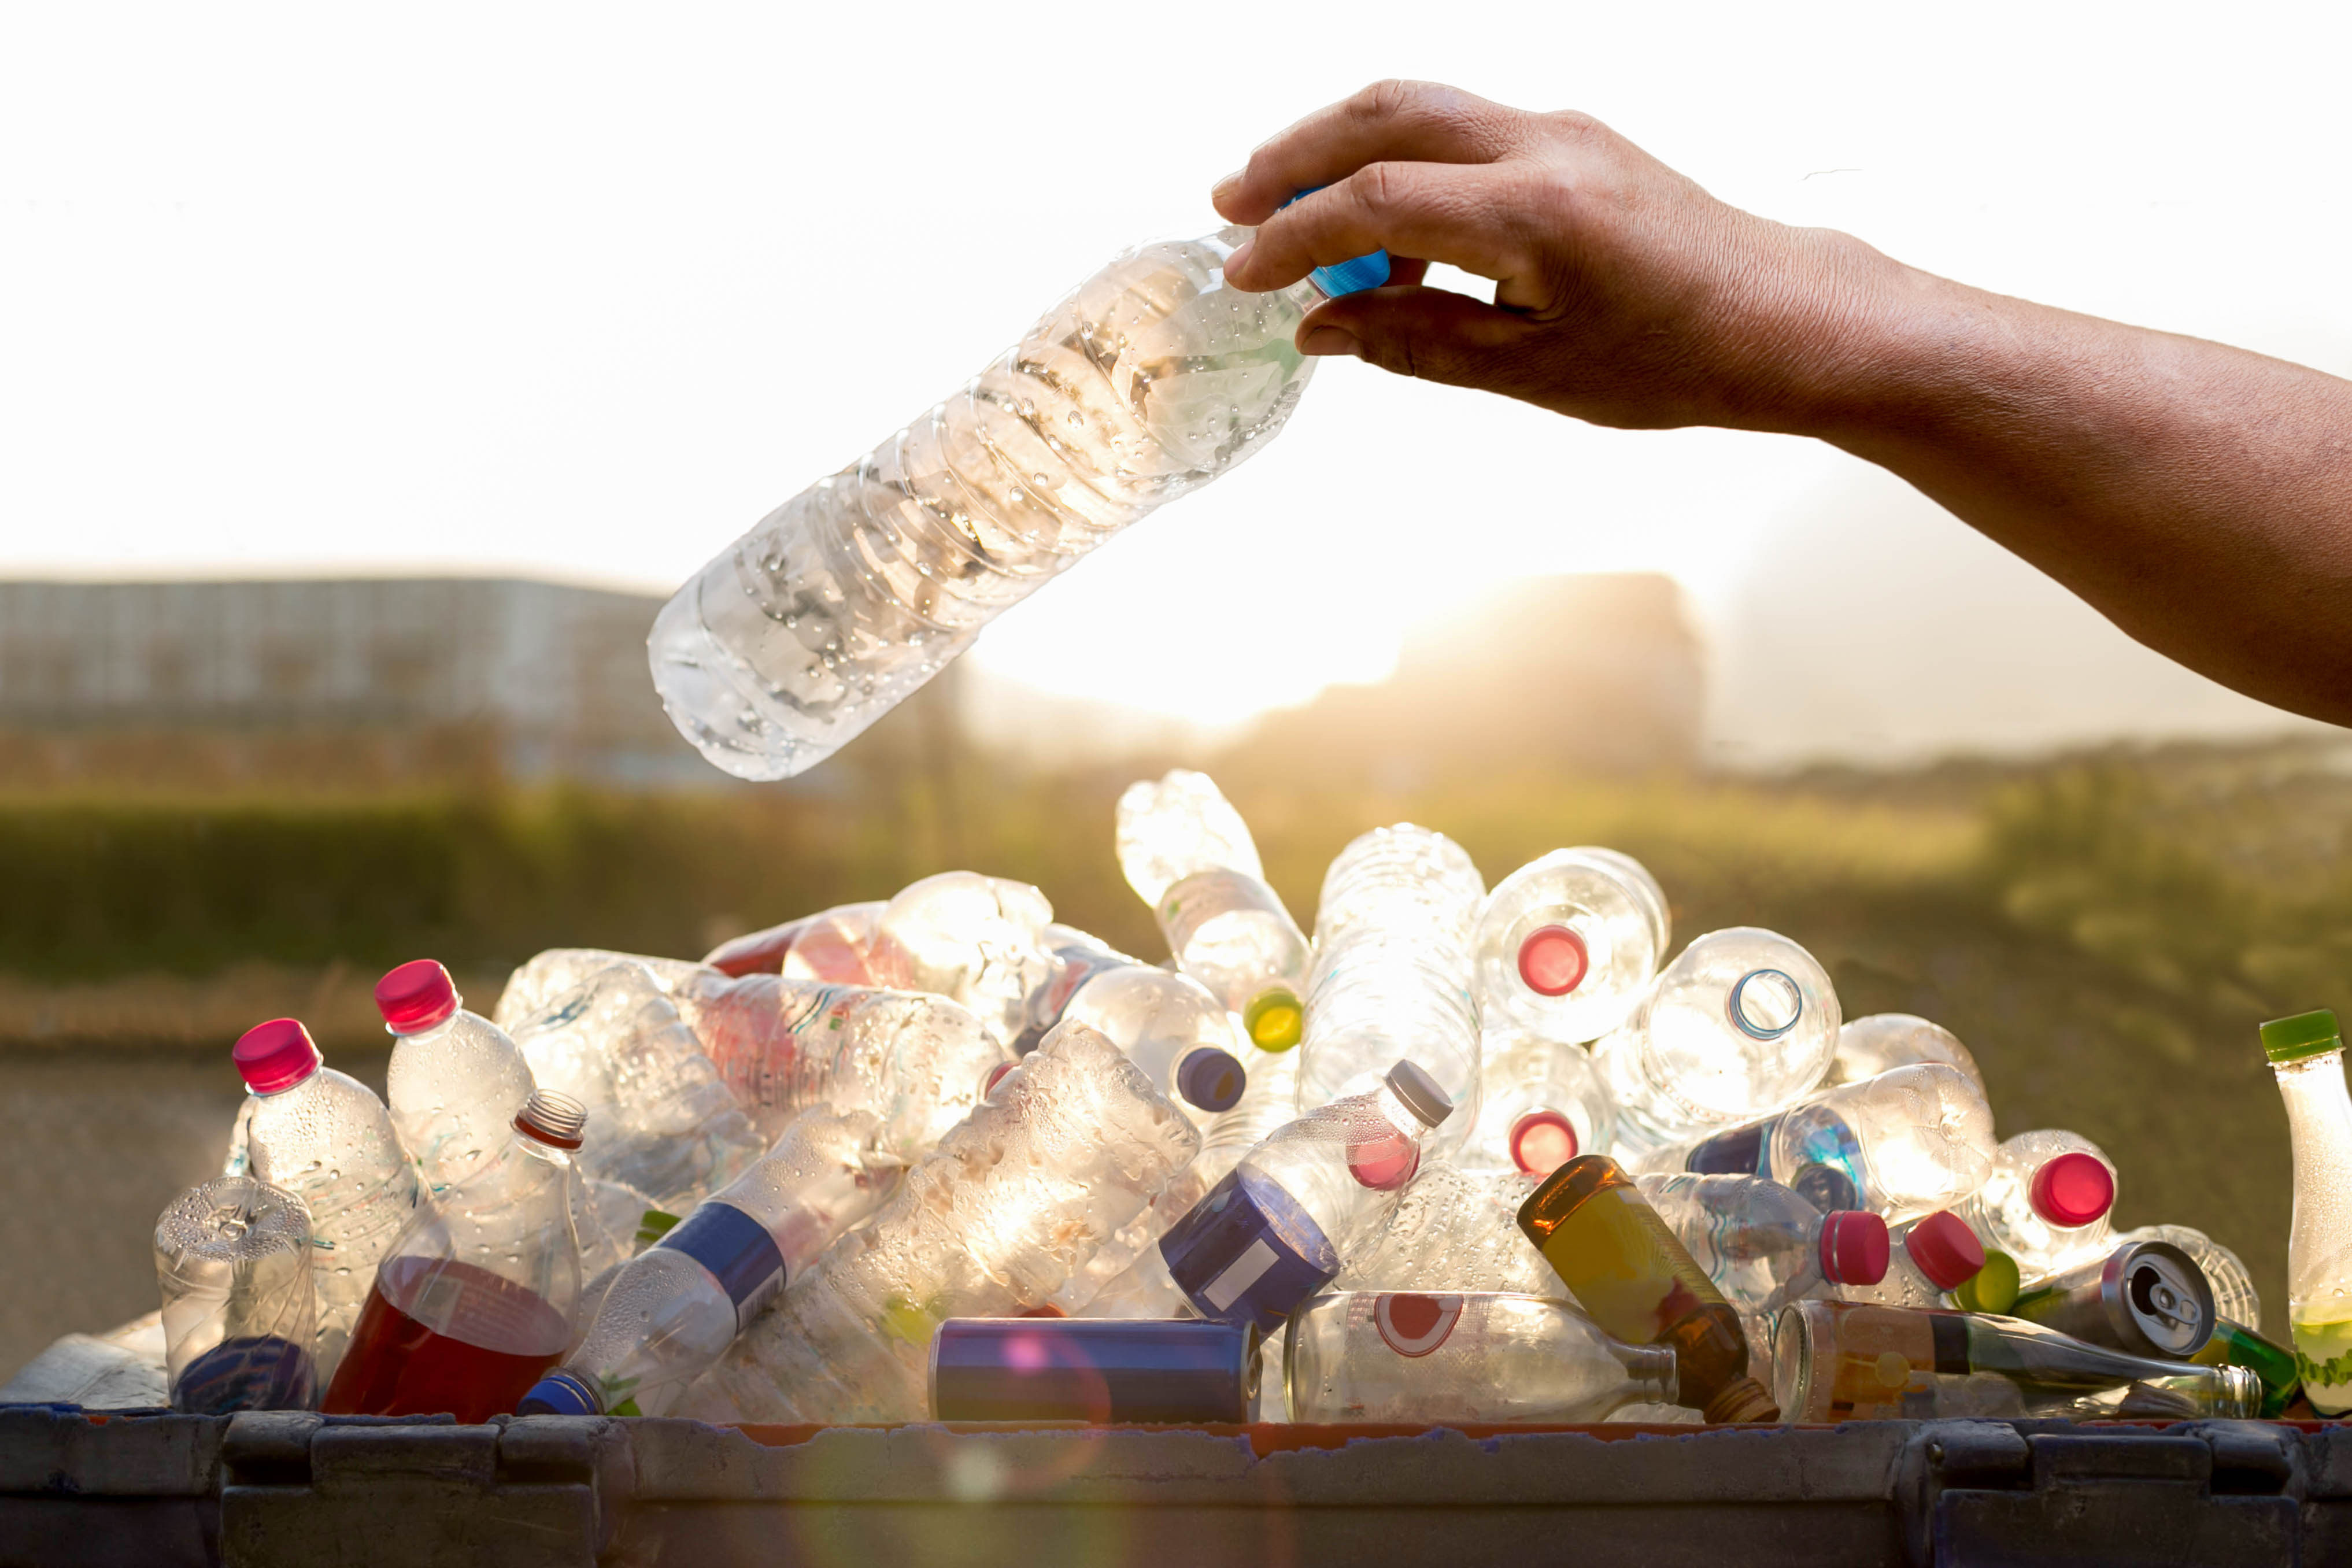 A producer responsibility scheme that compels companies to pay for recycling will ultimately have an impact on consumer prices. Photo: Shutterstock